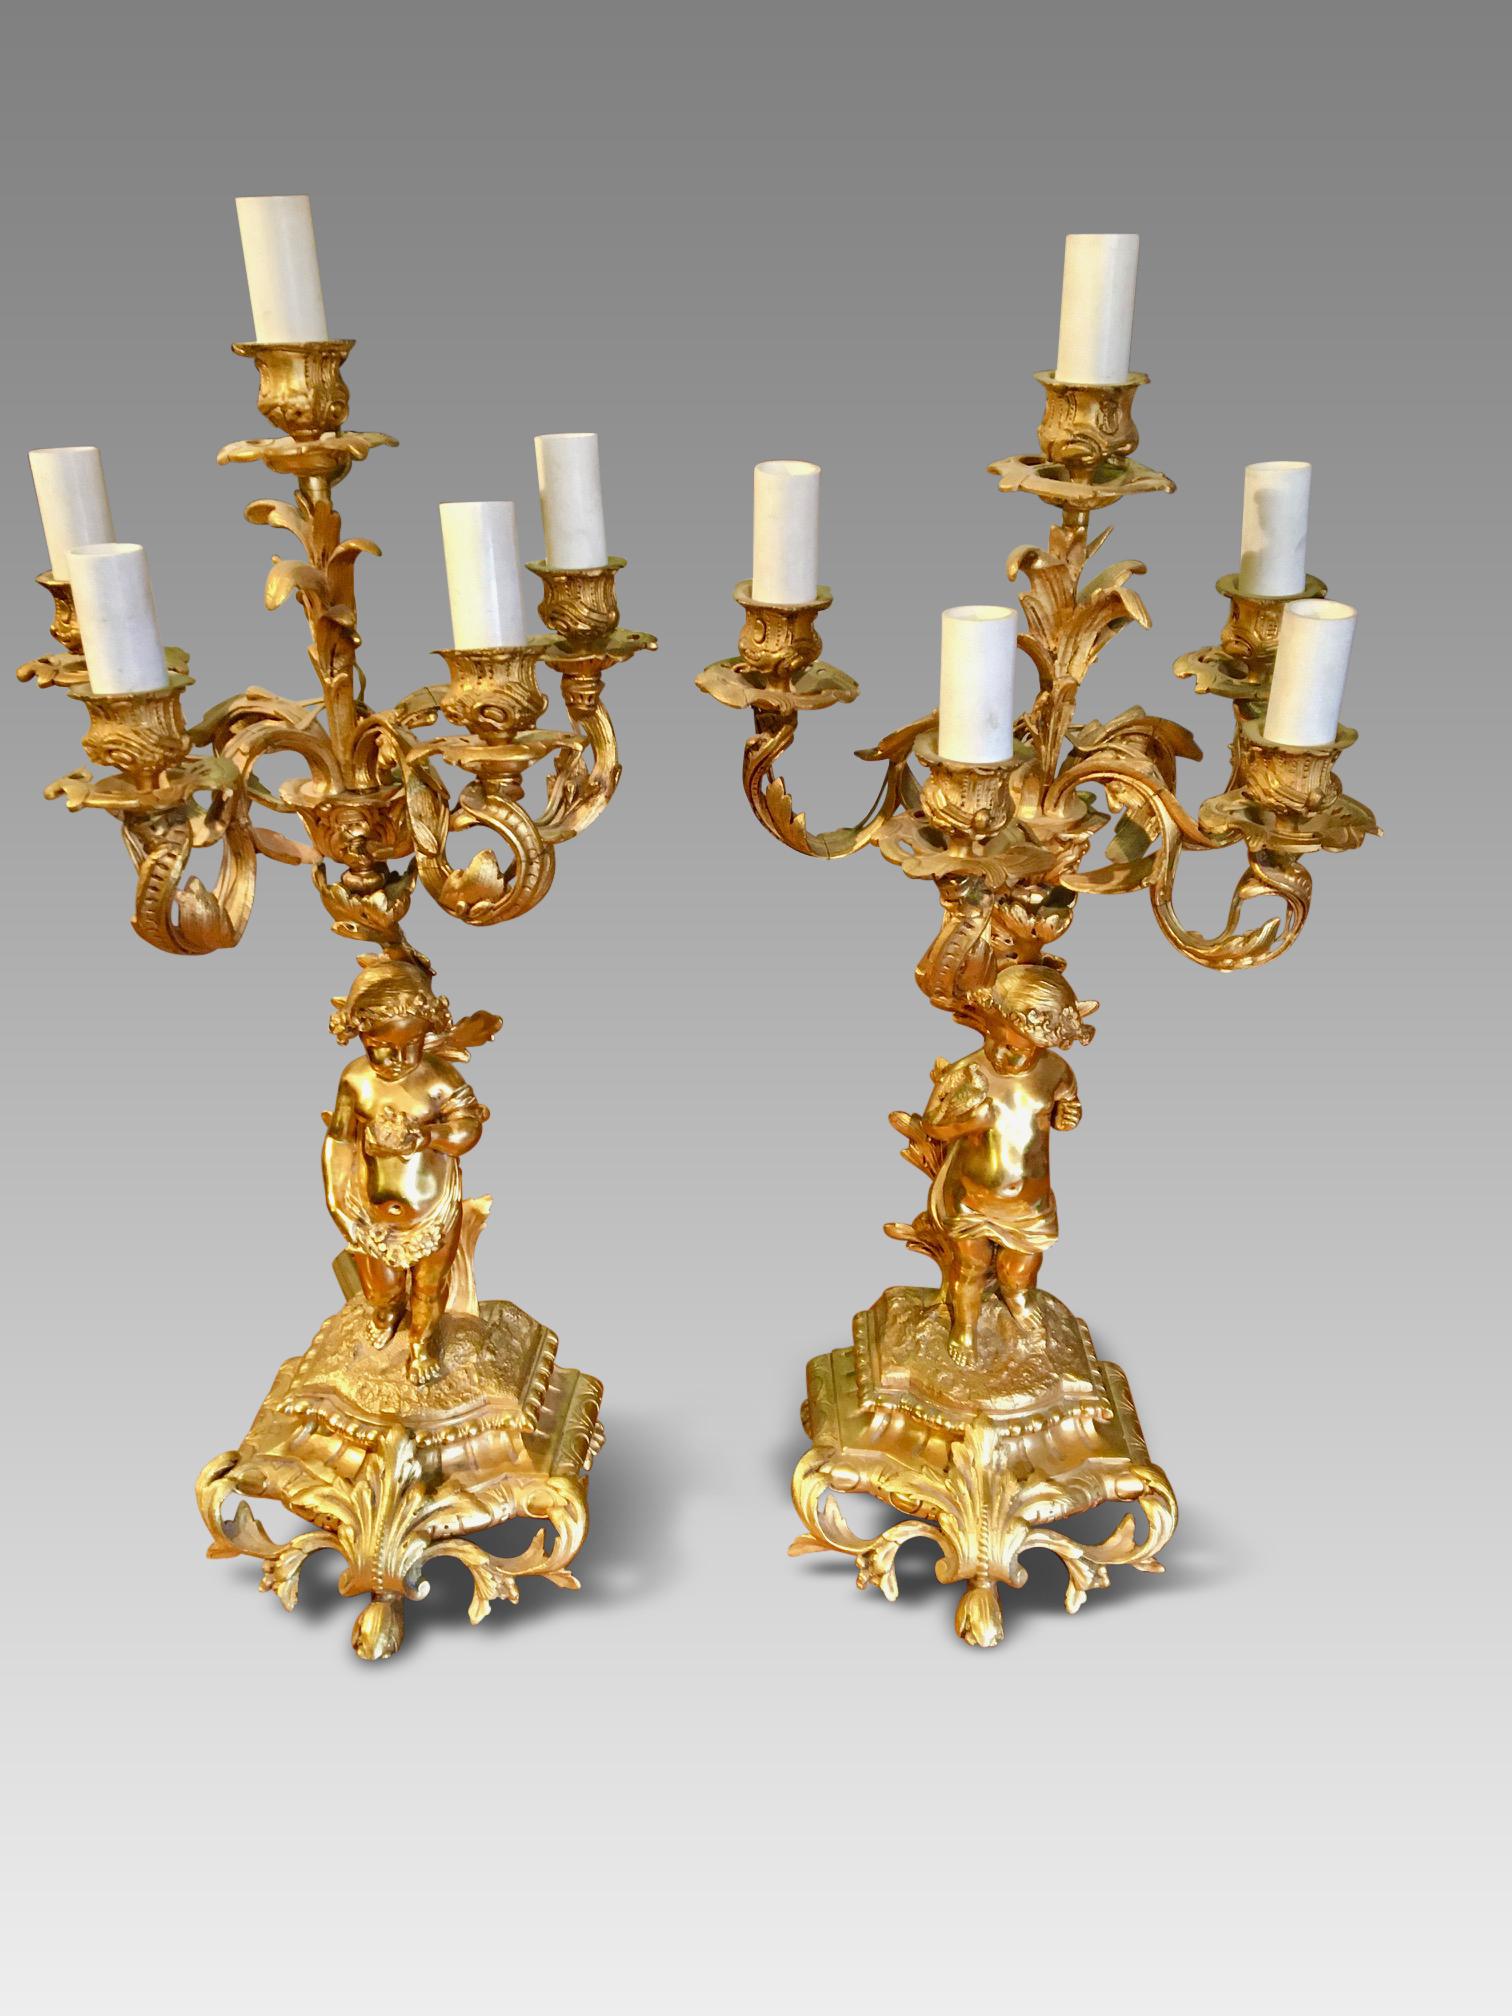 Fine quality pair of 5 branch gilded candelabra in excellent condition. English circa 1930s.
These candelabra are a very good size, standing 20 ins high with a circumference size of 10 ins.
The design and craftsmanship is superb with both cherubs